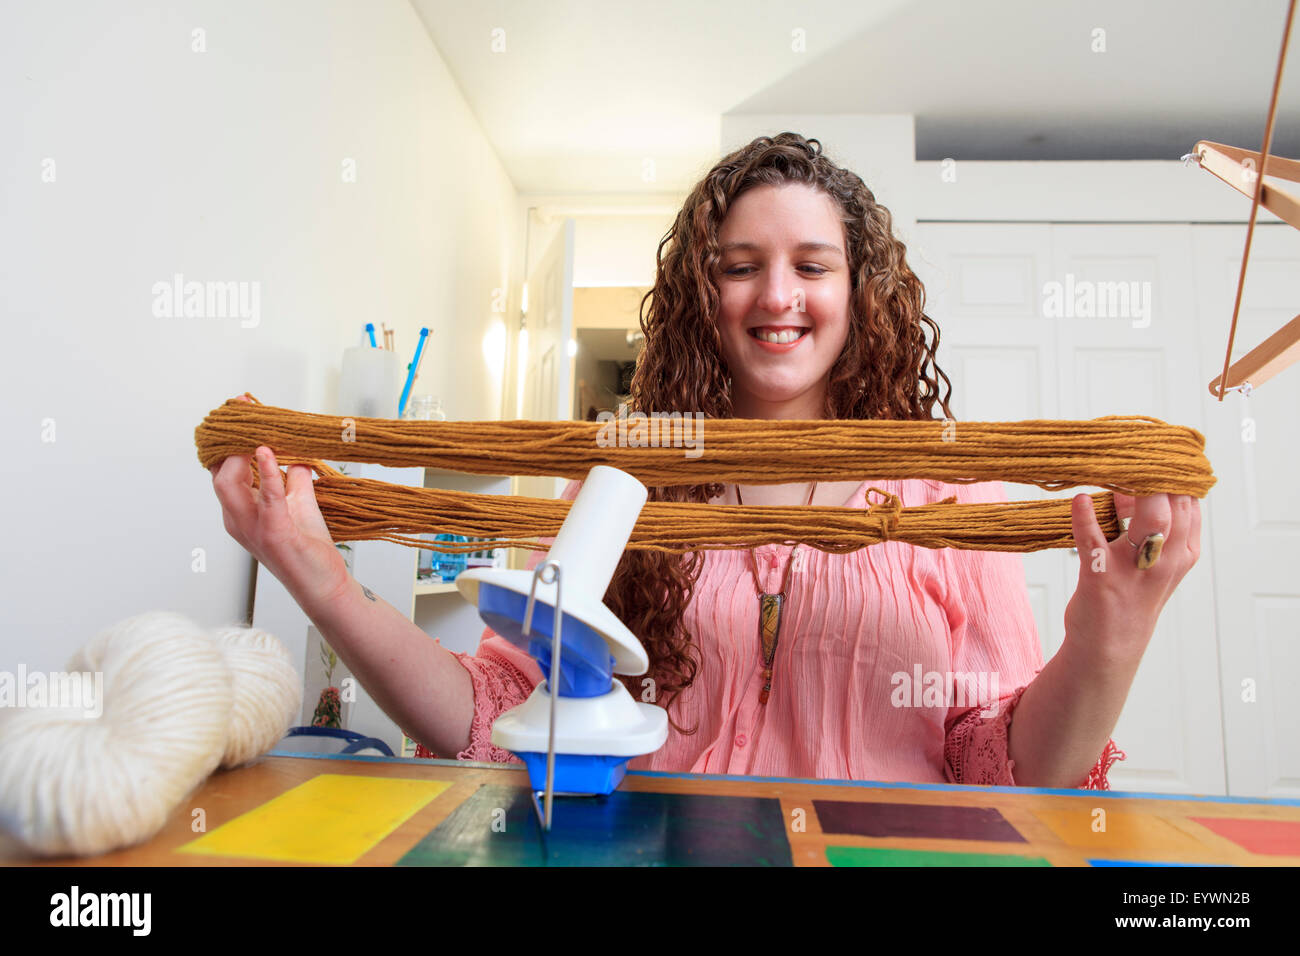 Woman with Muscular Dystrophy working with her yarn for her knitting business Stock Photo